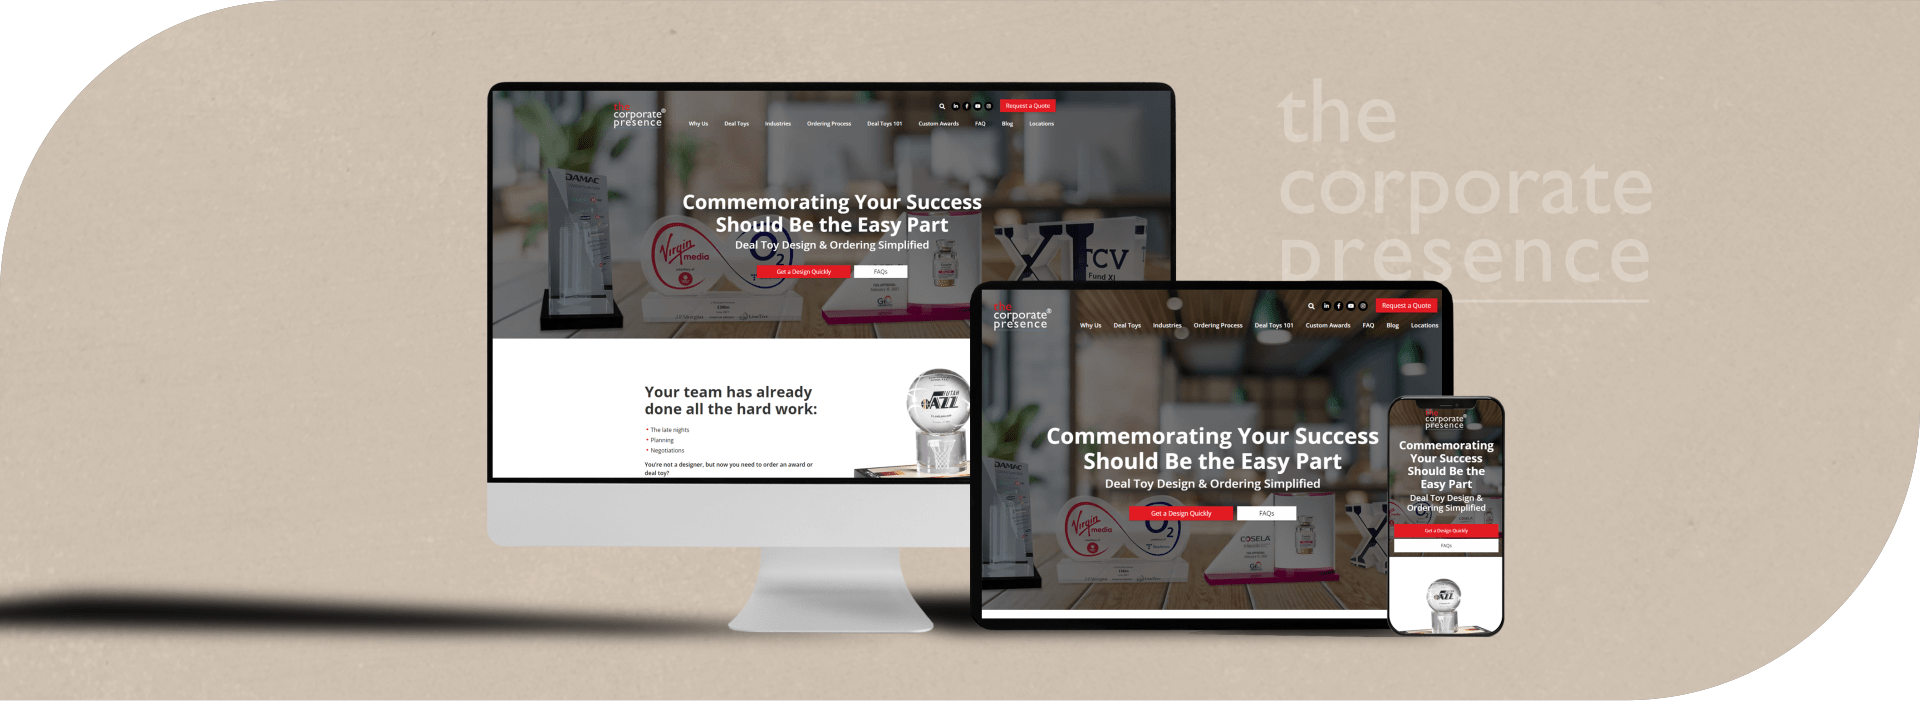 The Corporate Presence - Responsive View